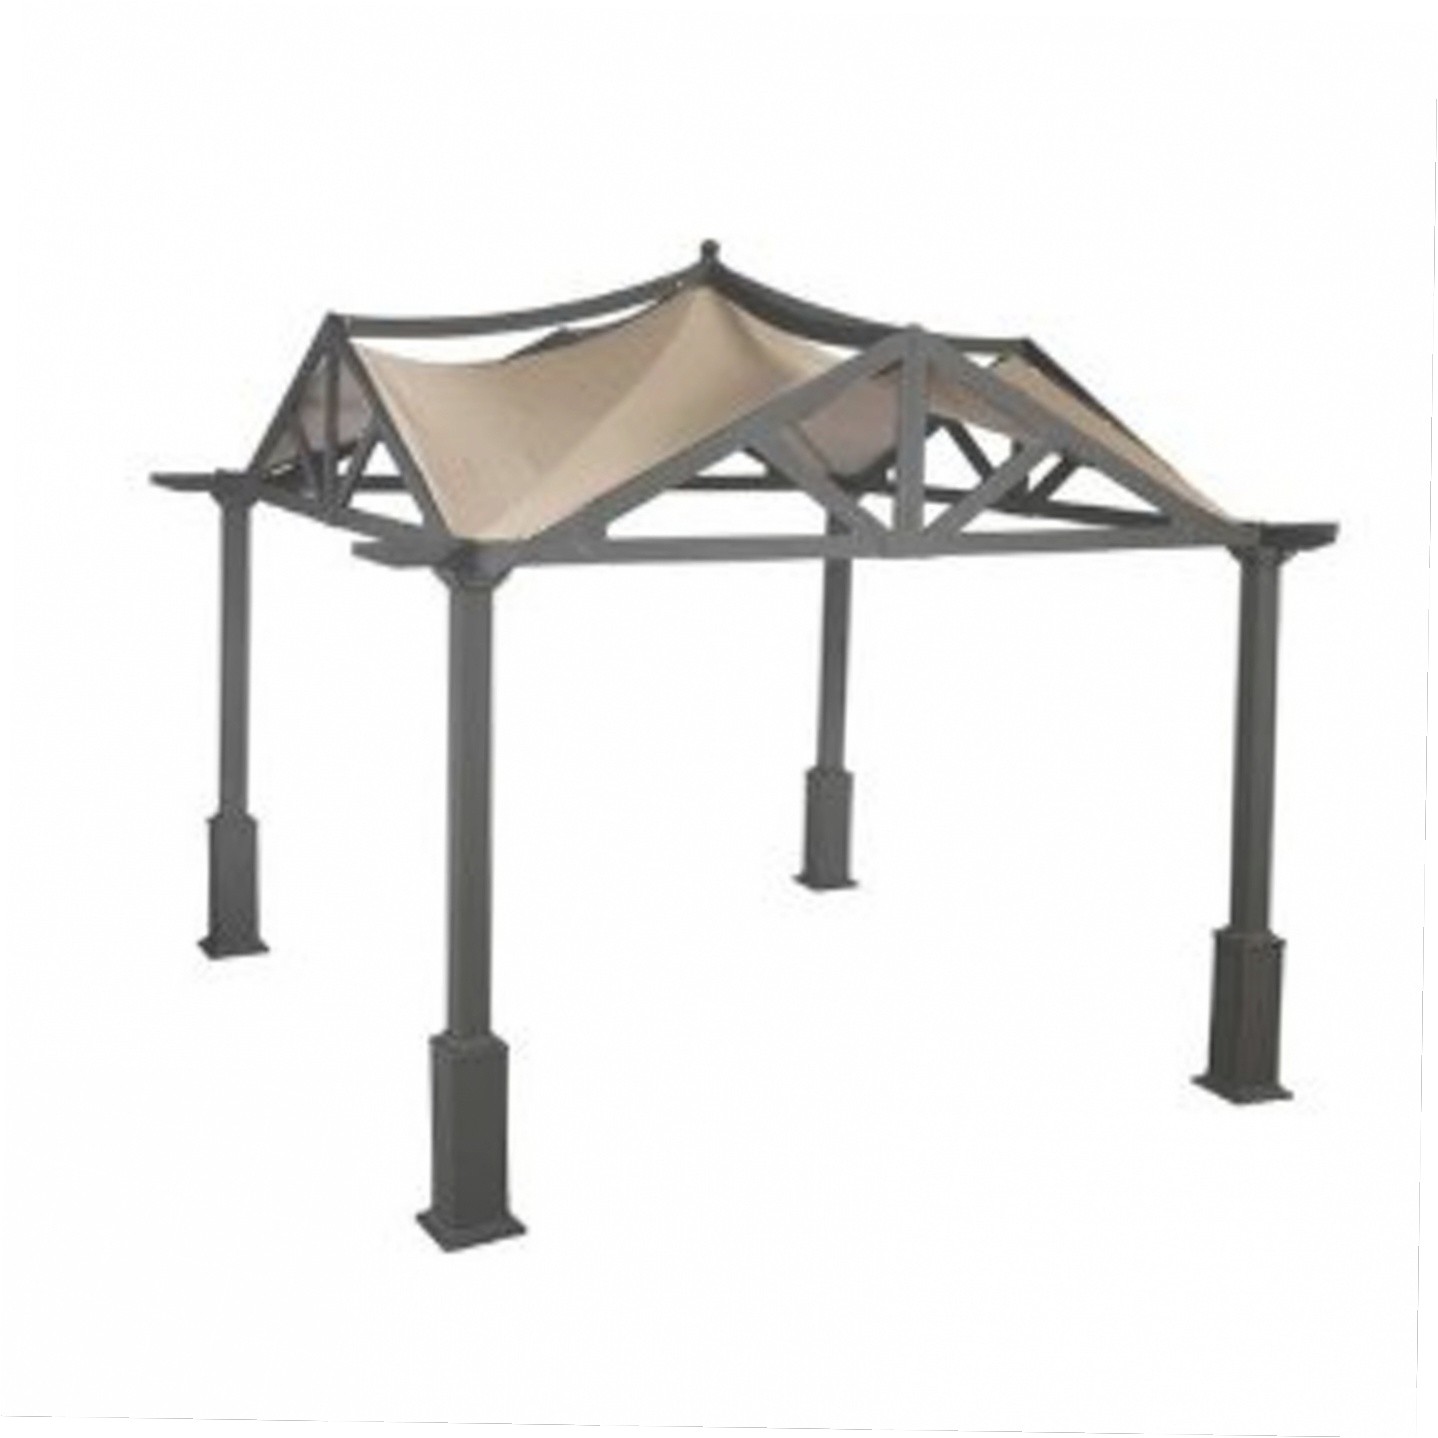 allen roth gazebo replacement parts